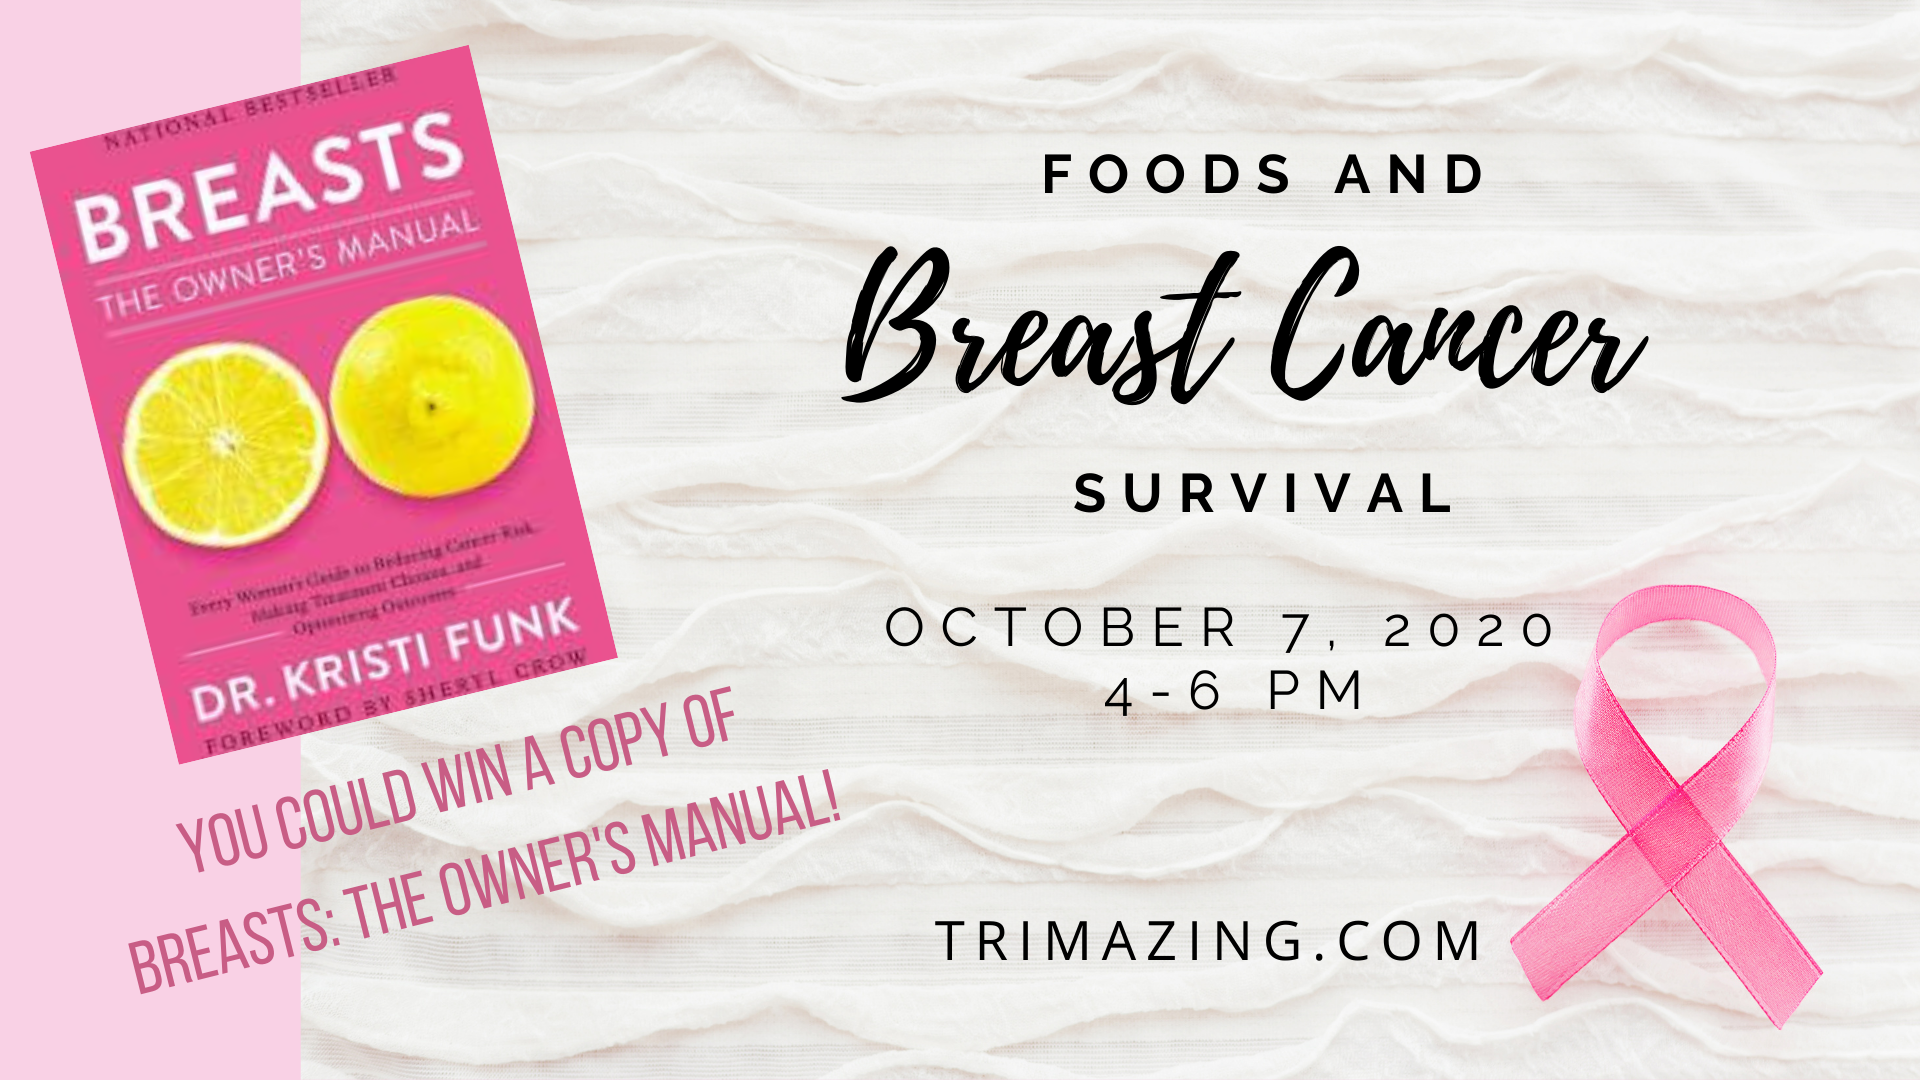 Foods and Breast Cancer Survival trimazing.com